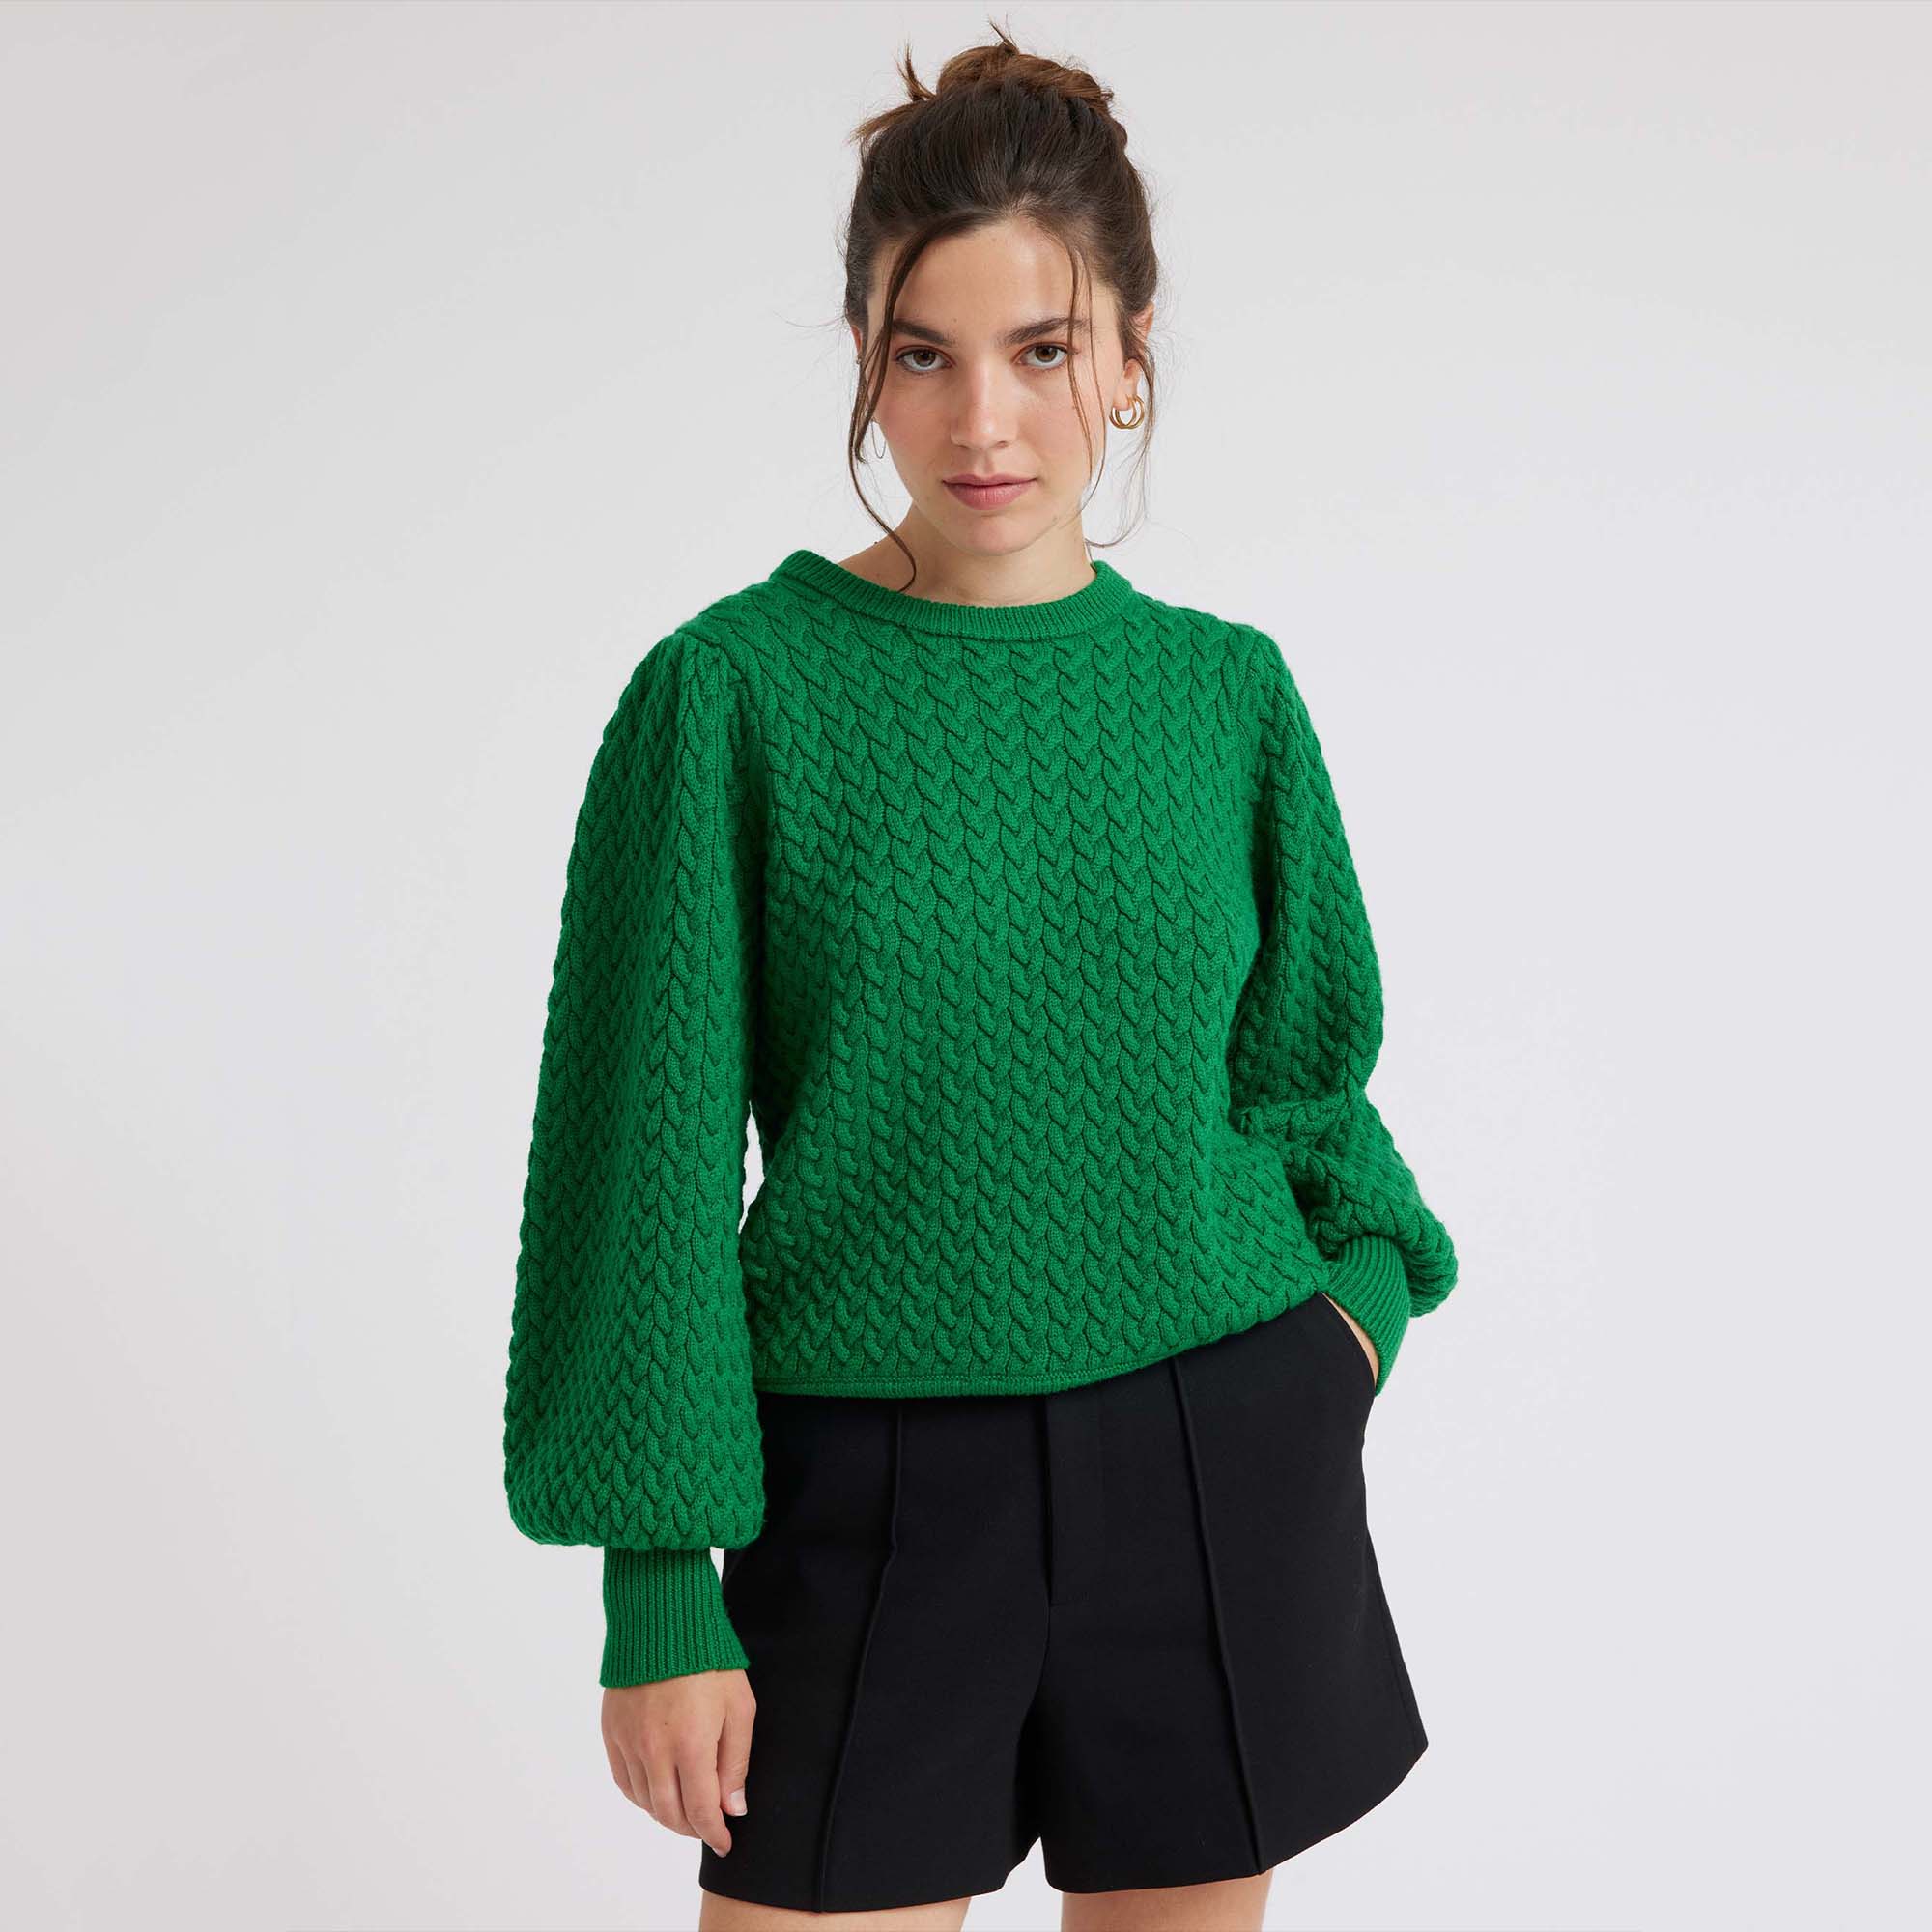 Green round neck jumper with long ballon sleeves in a cable stitch